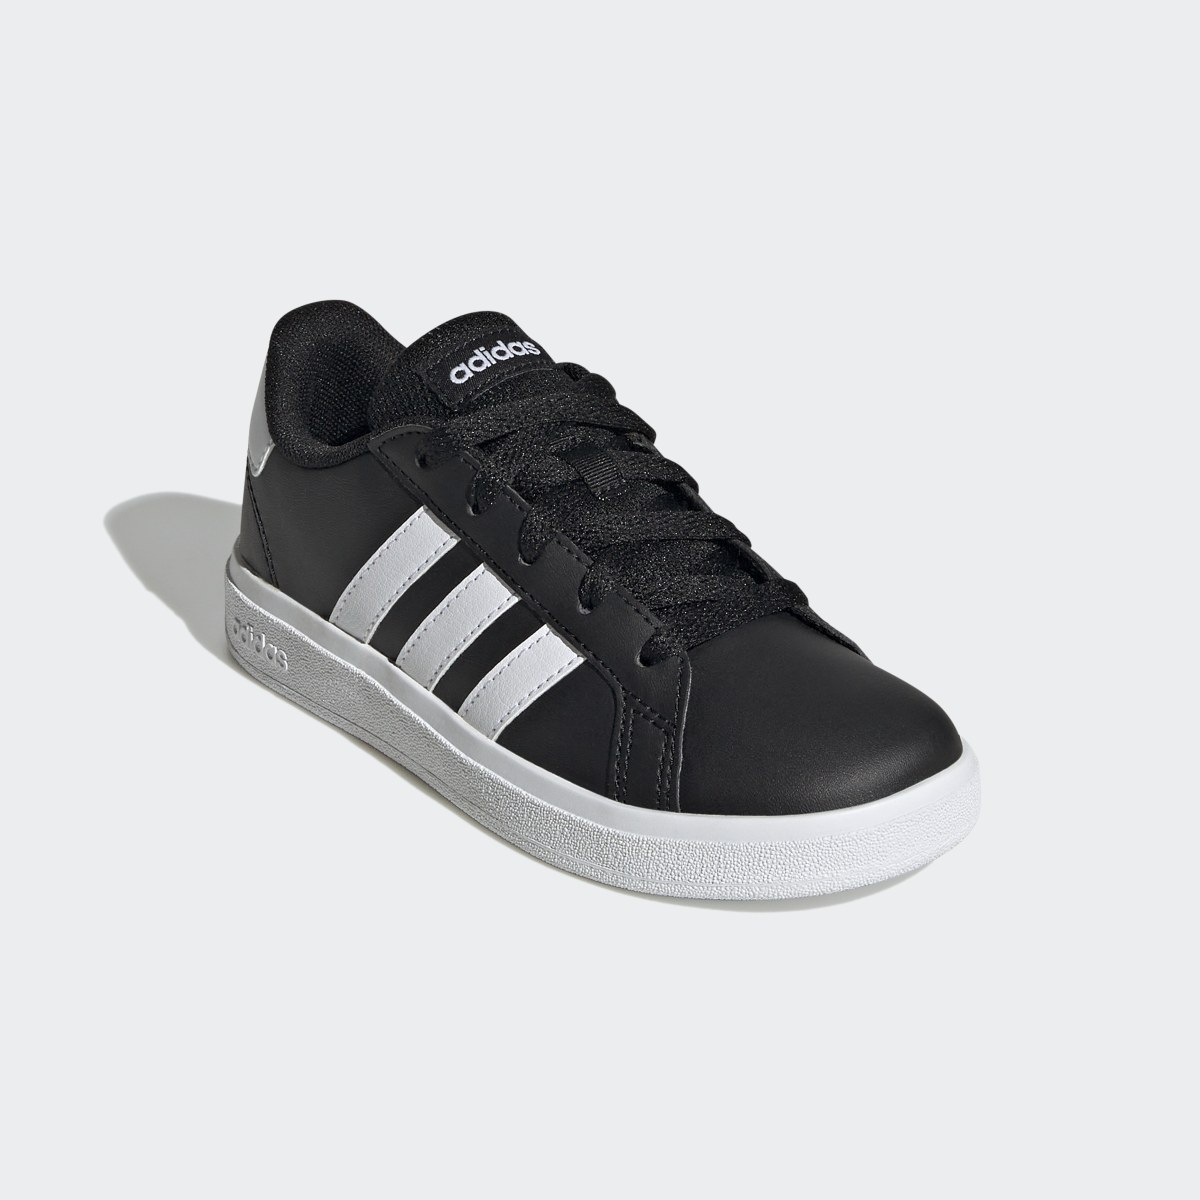 Adidas Grand Court Lace-Up Shoes. 5